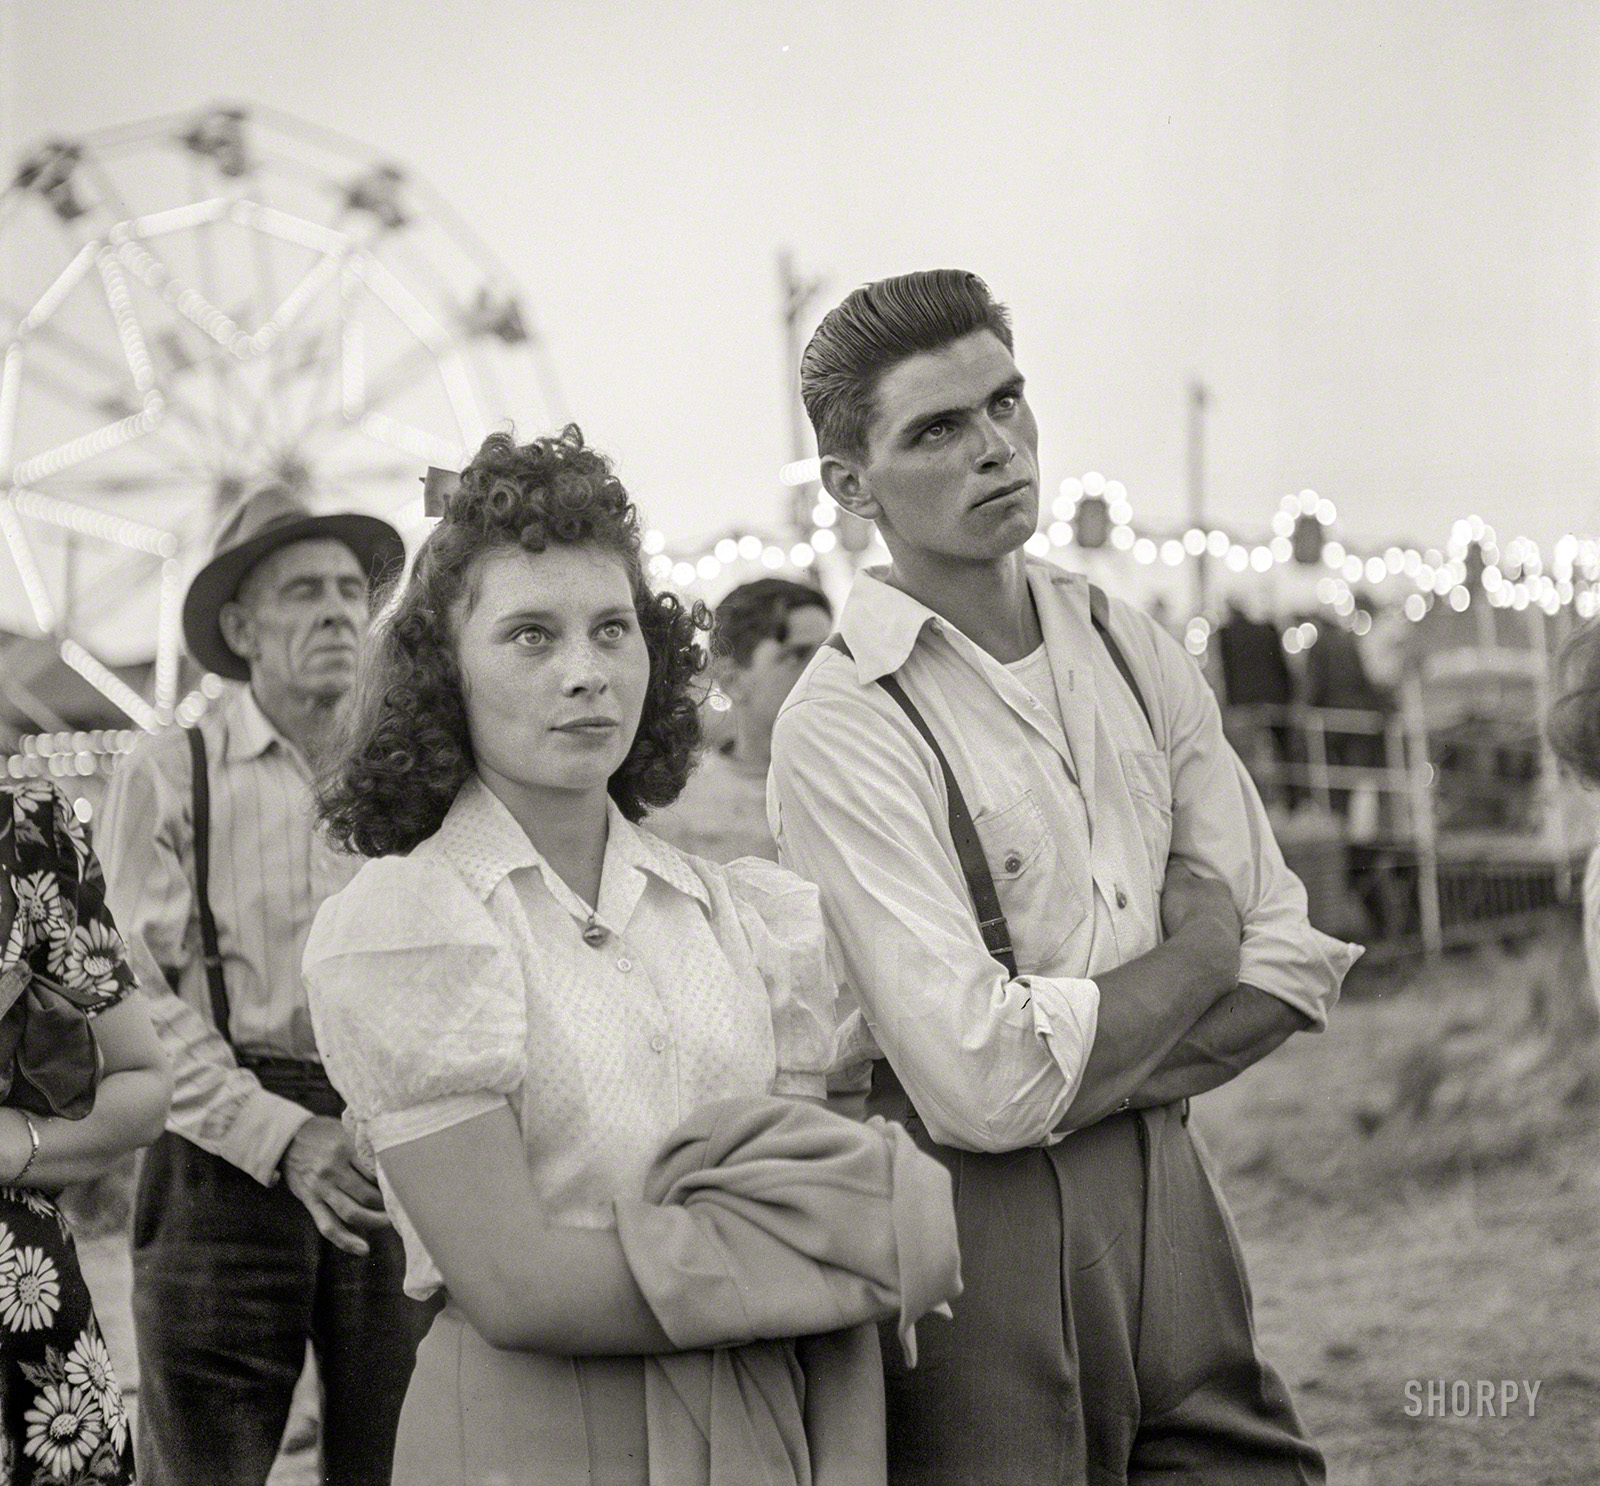 July 1942. Klamath Falls, Oregon. "At the sideshow of the circus." Step right up, folks, and SEE the pop-eyed girl! For a paltry dime, BEHOLD the Serious Boy! Photo by Russell Lee for the Office of War Information. View full size.